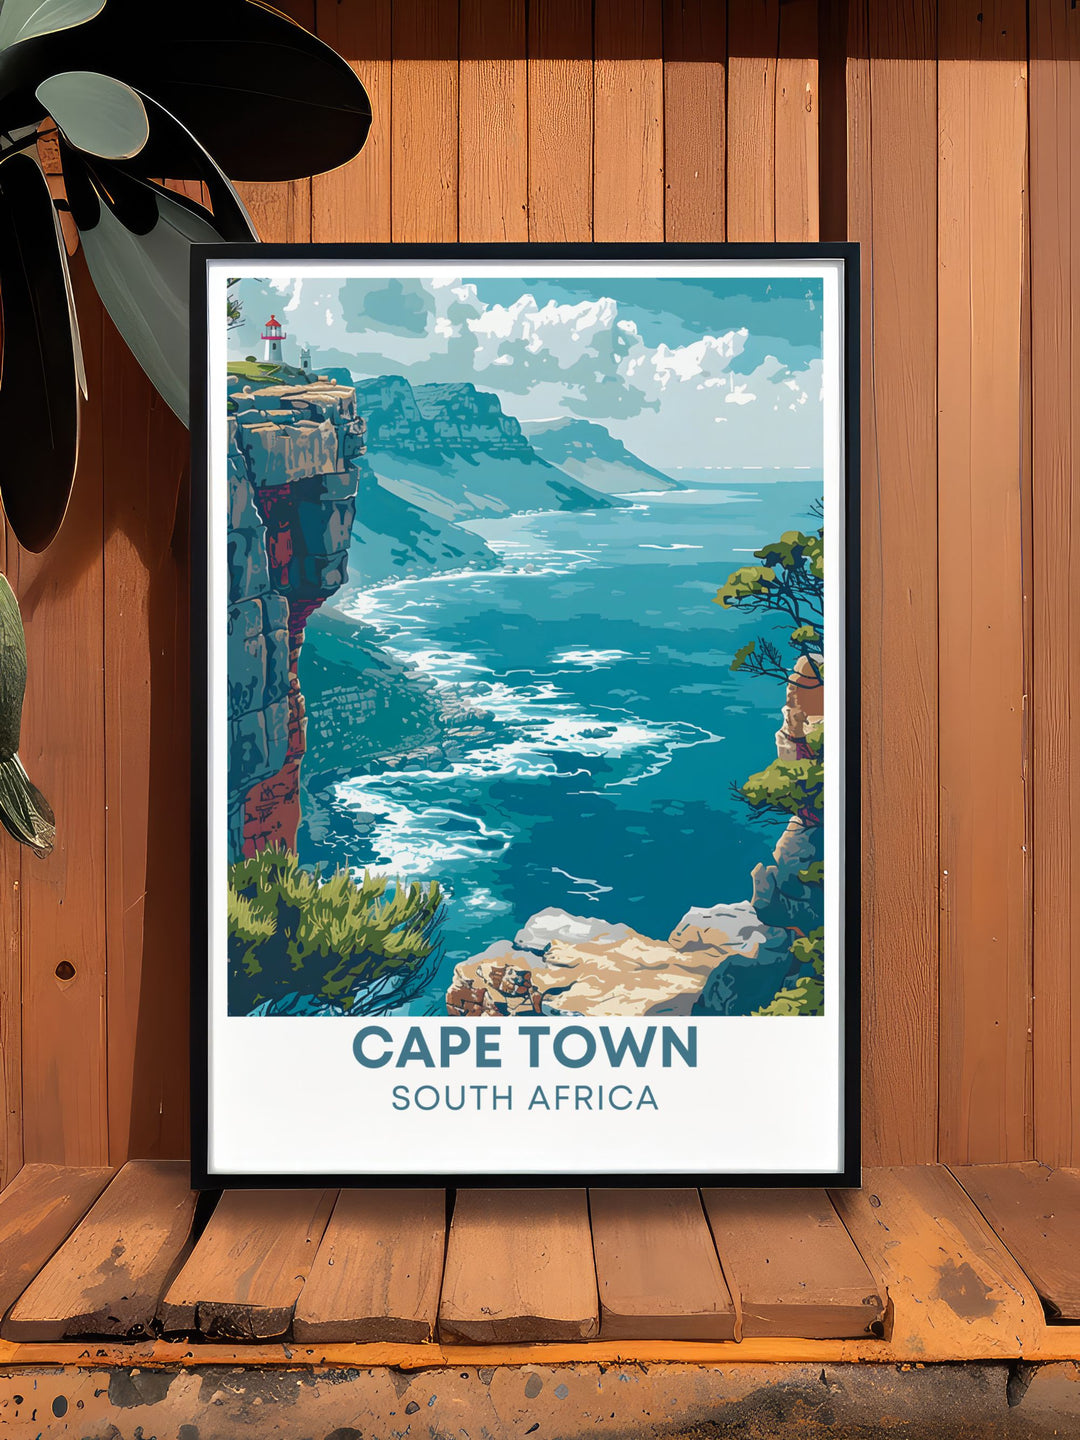 Featuring the majestic views of Table Mountain and the scenic cliffs of Cape Point, this poster is ideal for those who wish to bring a piece of South Africas natural beauty into their home.